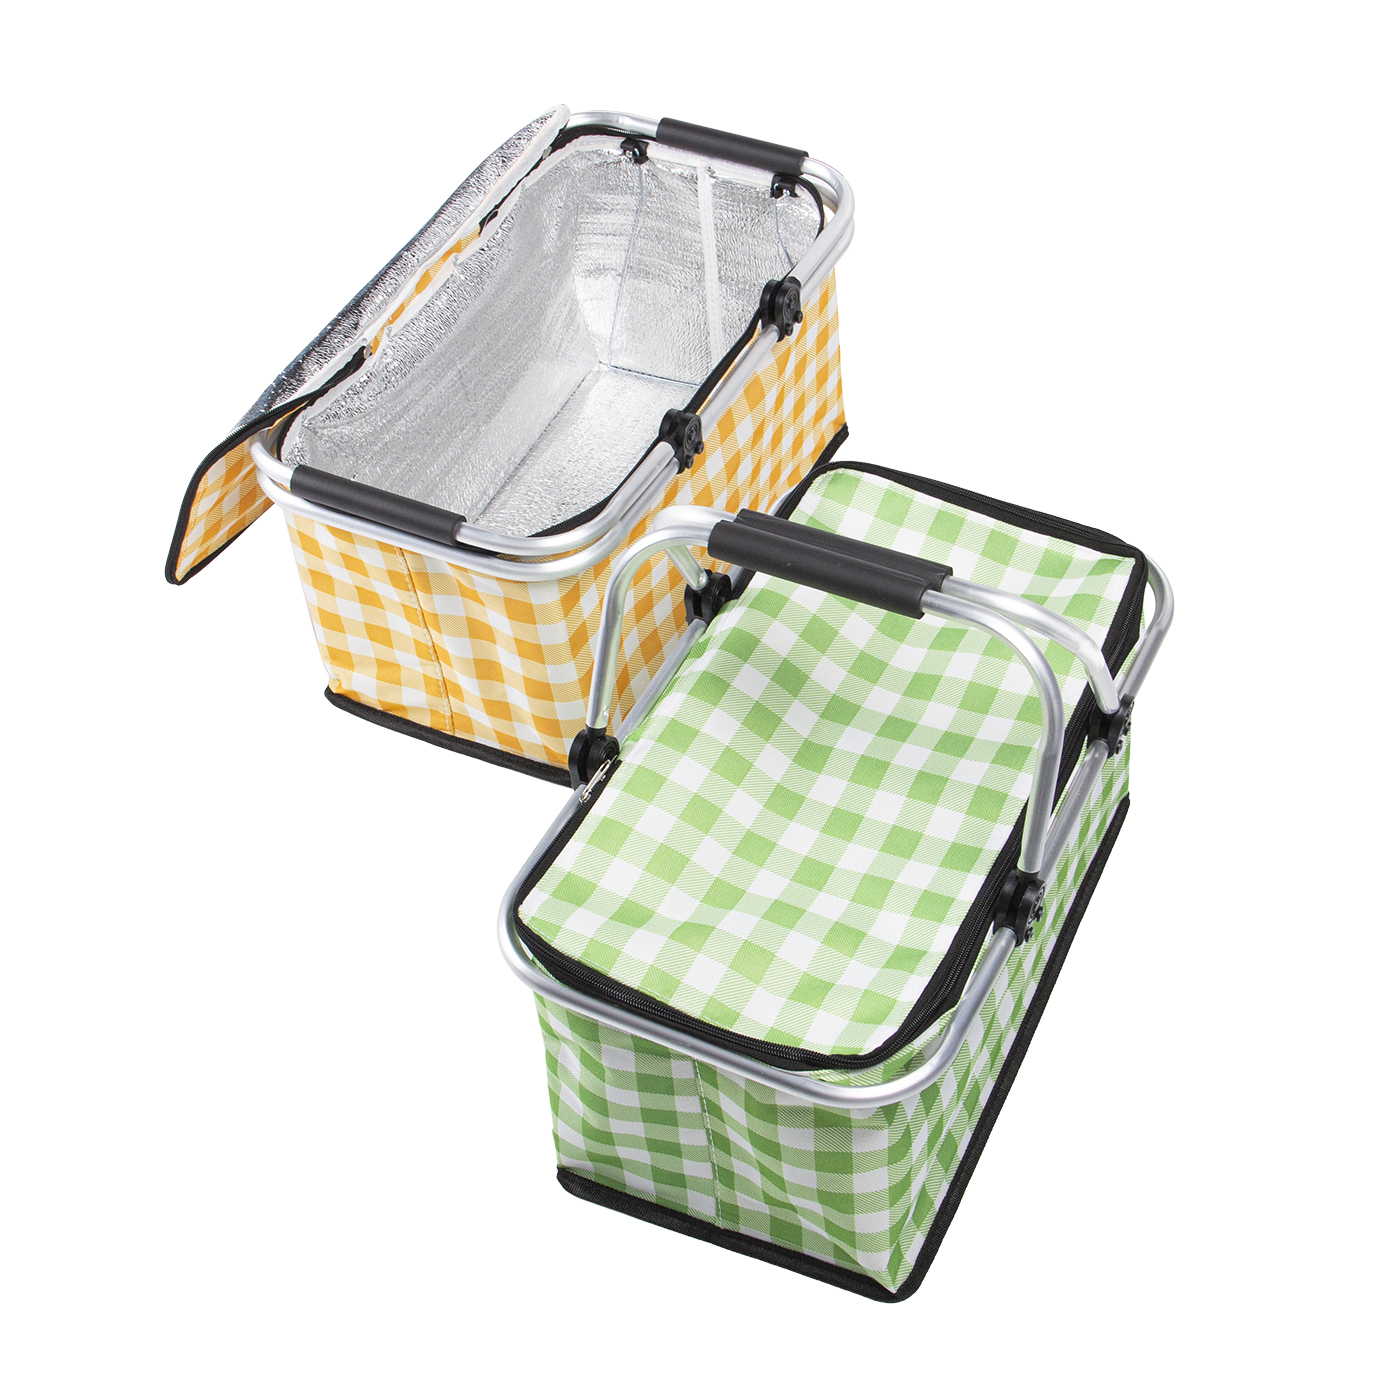 Foldable Insulated Picnic Basket3